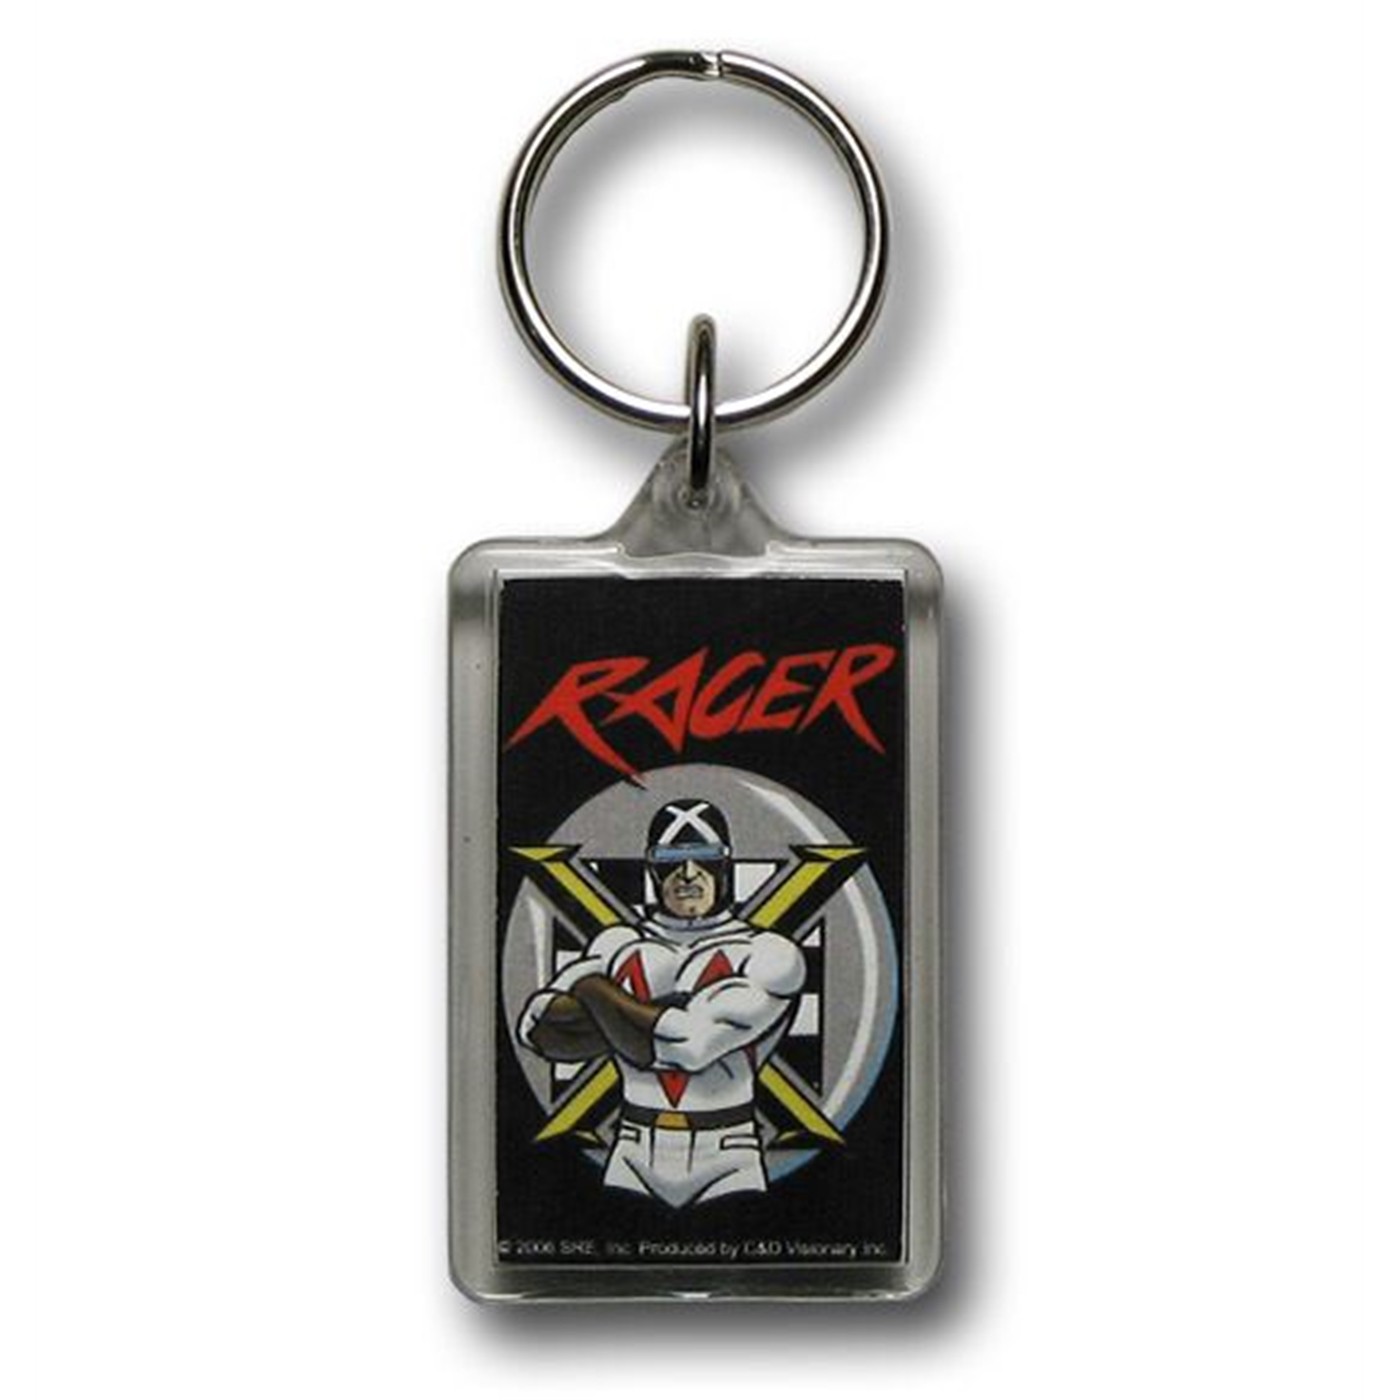 Racer X Arms Folded Lucite Keychain